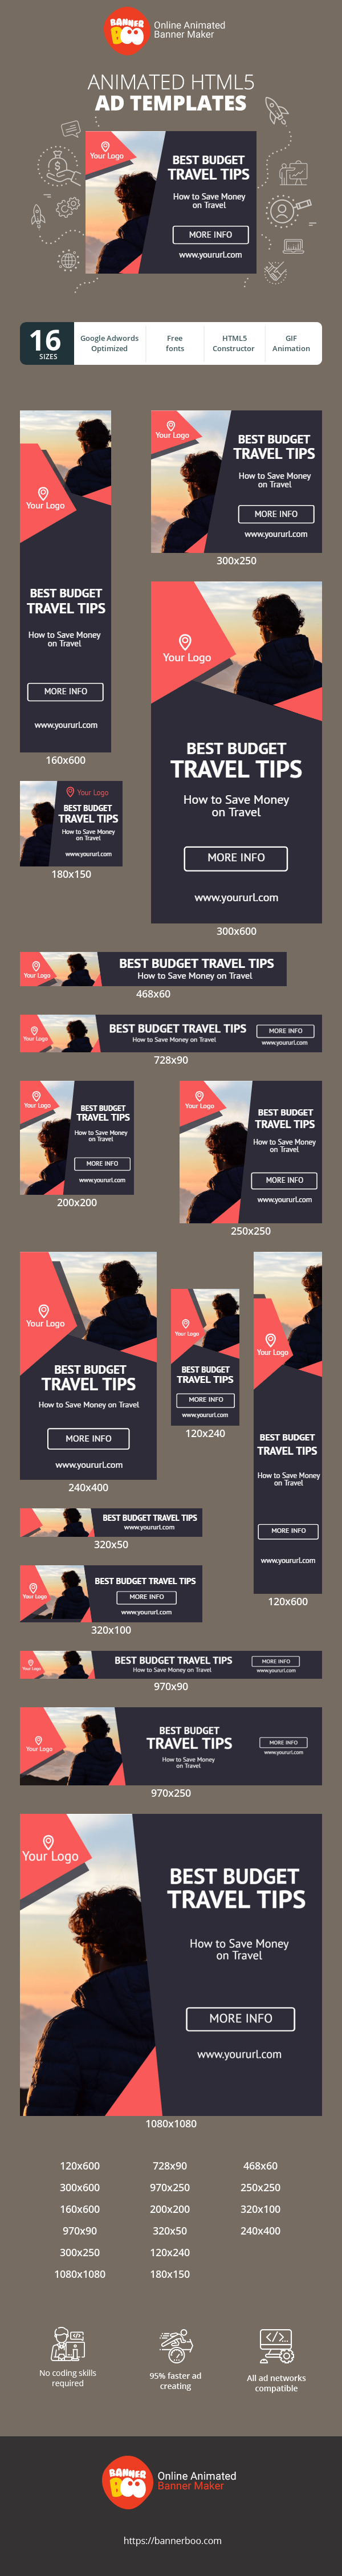 Banner ad template — Best Budget Travel Tips